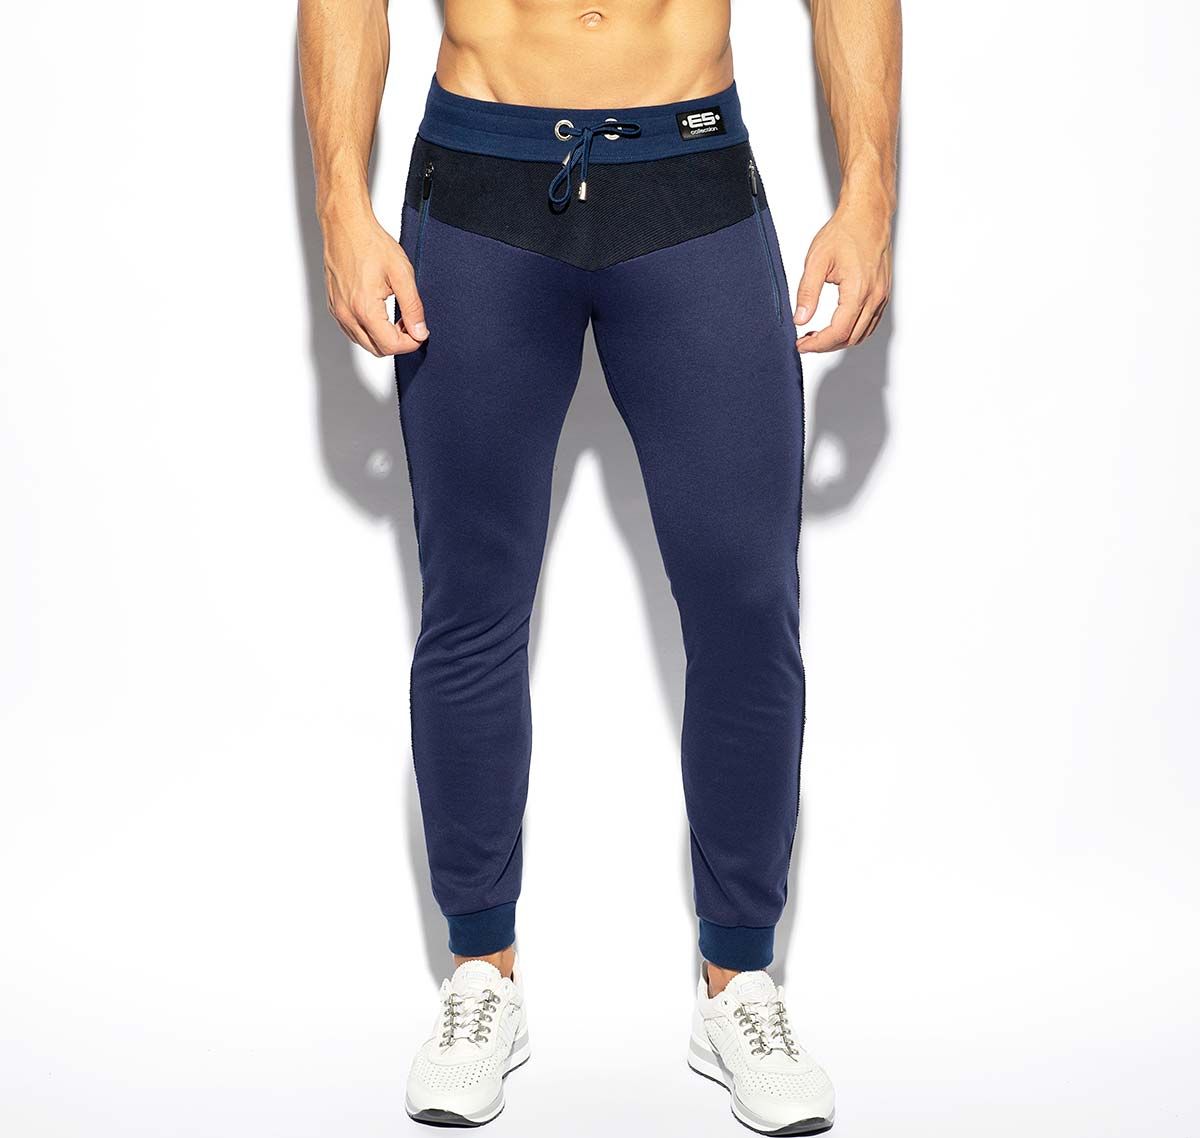 ES Collection training pants NAVY COMBI SPORTS PANTS SP277, navy